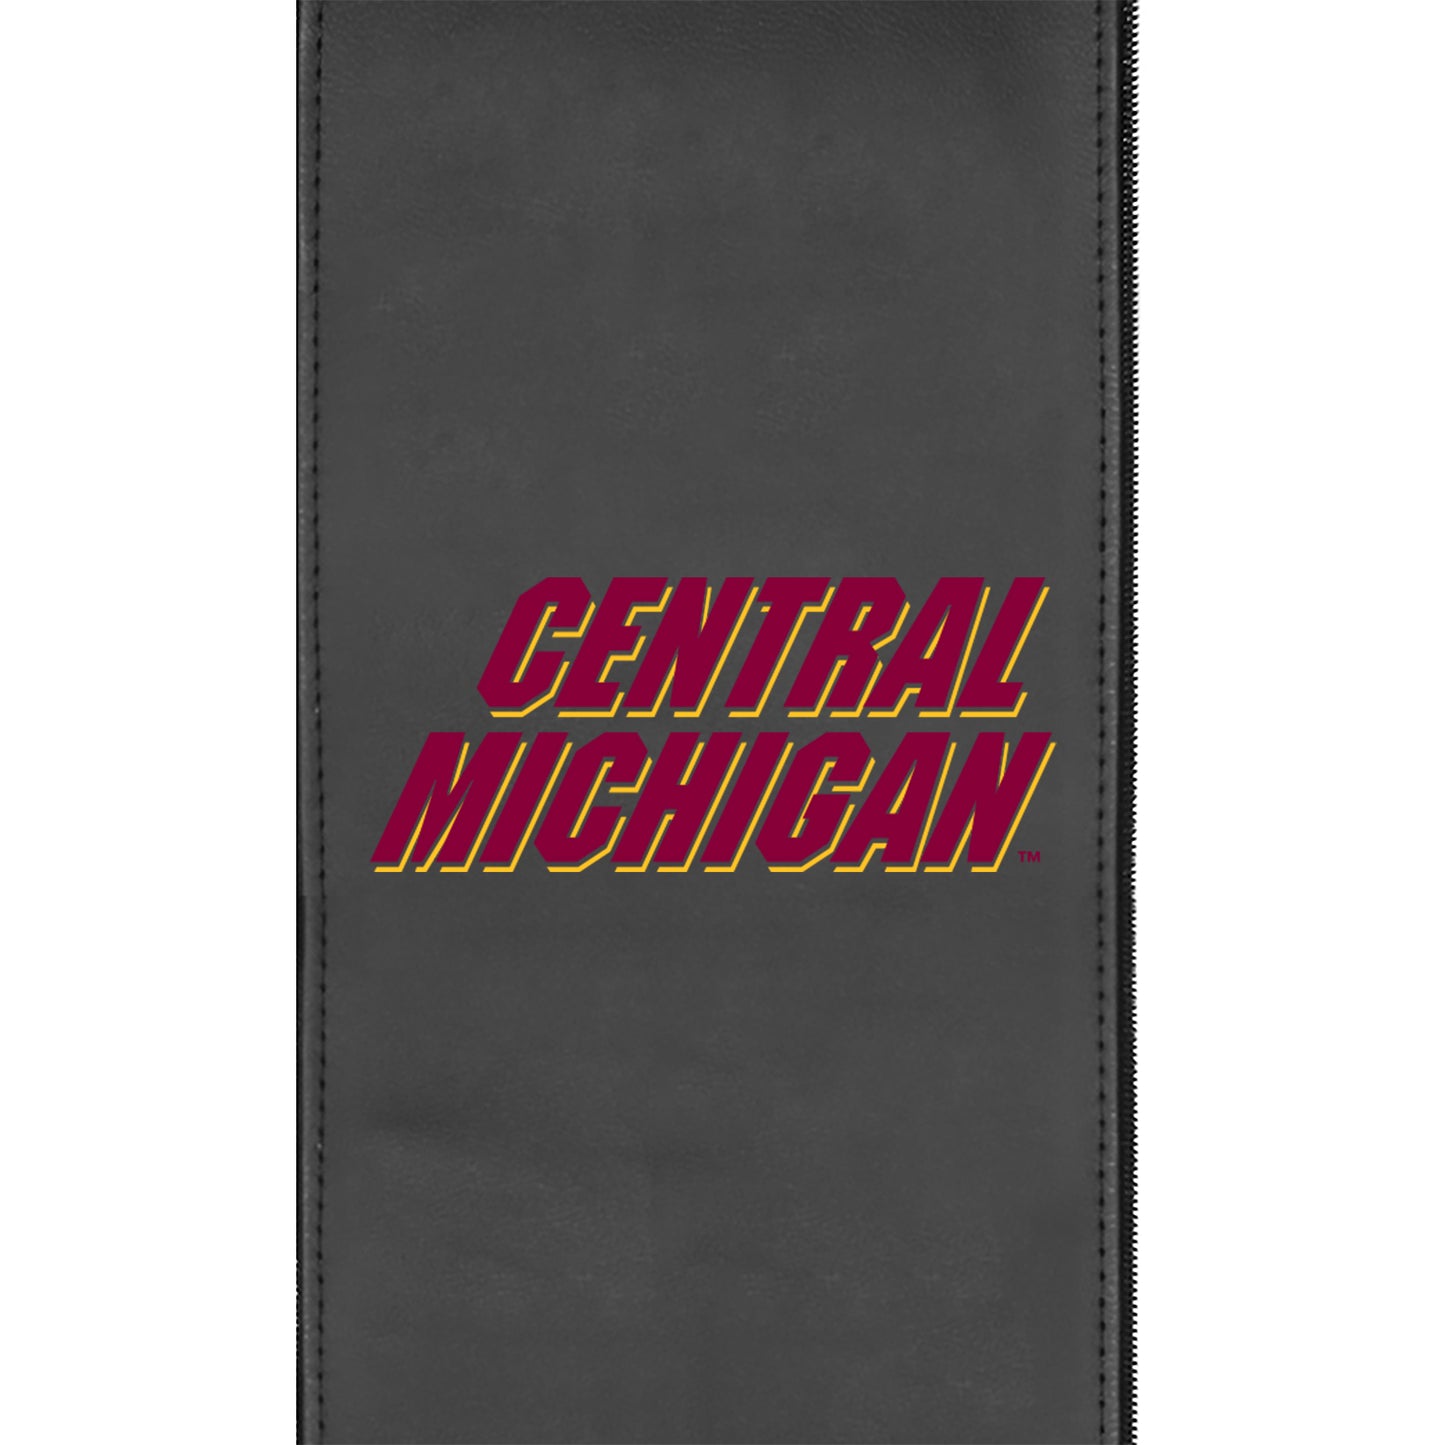 Logo Panel with Central Michigan Secondary